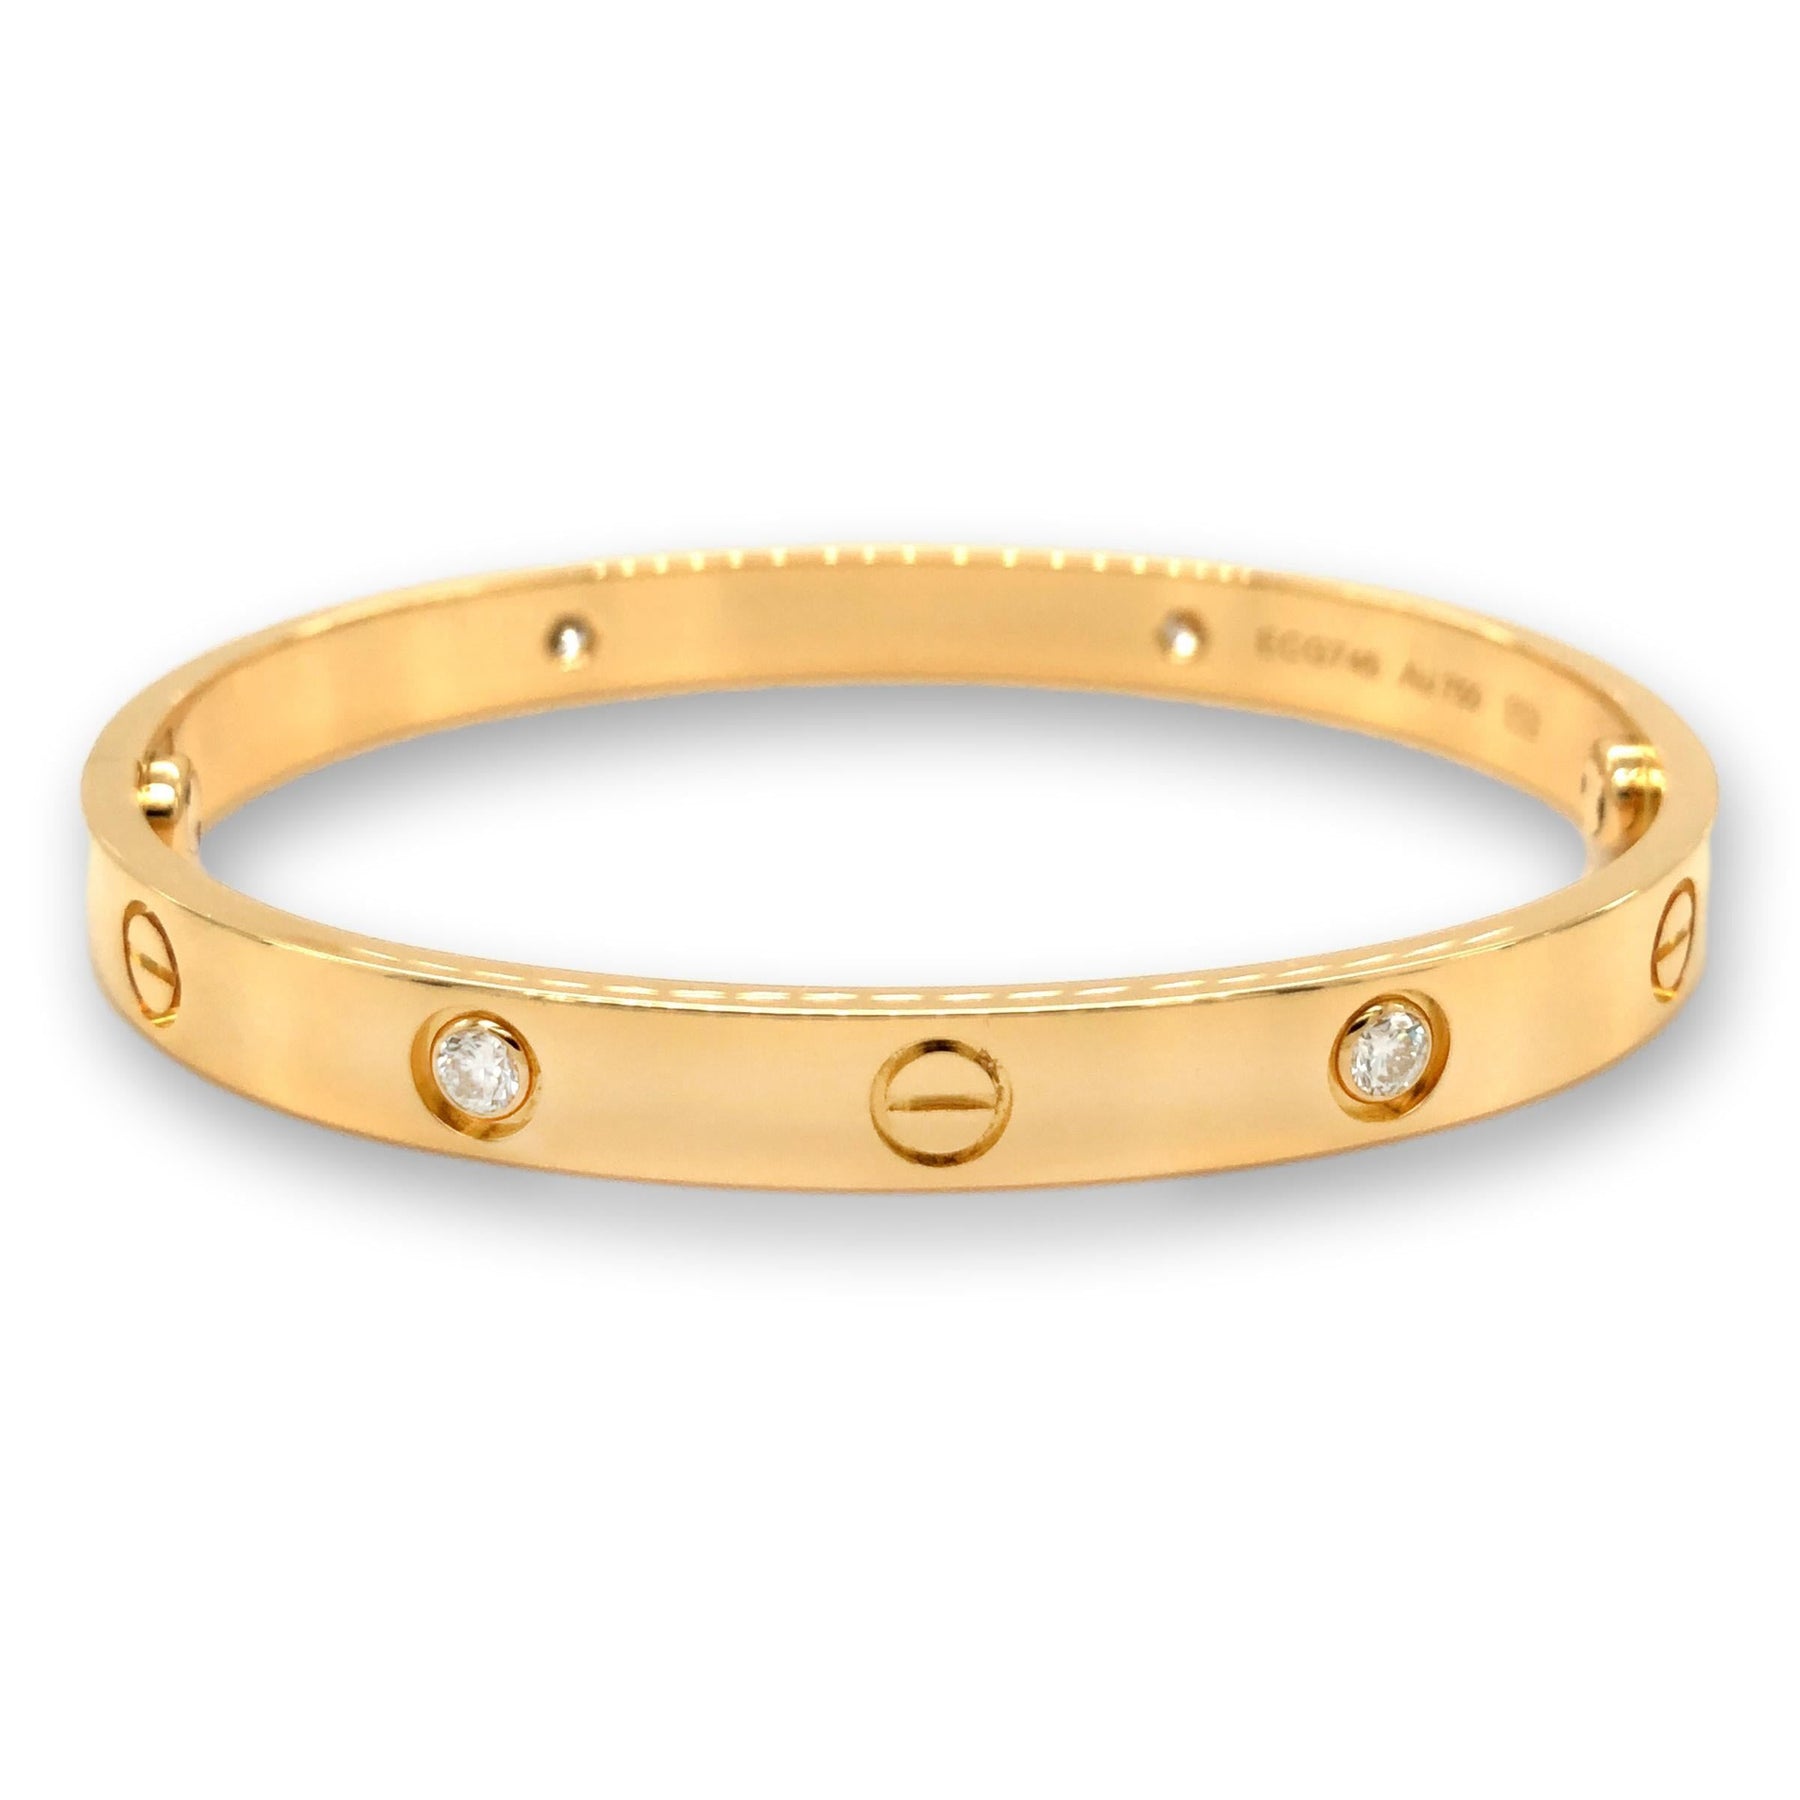 Cartier - Authenticated Bracelet - Yellow Gold Gold for Women, Very Good Condition